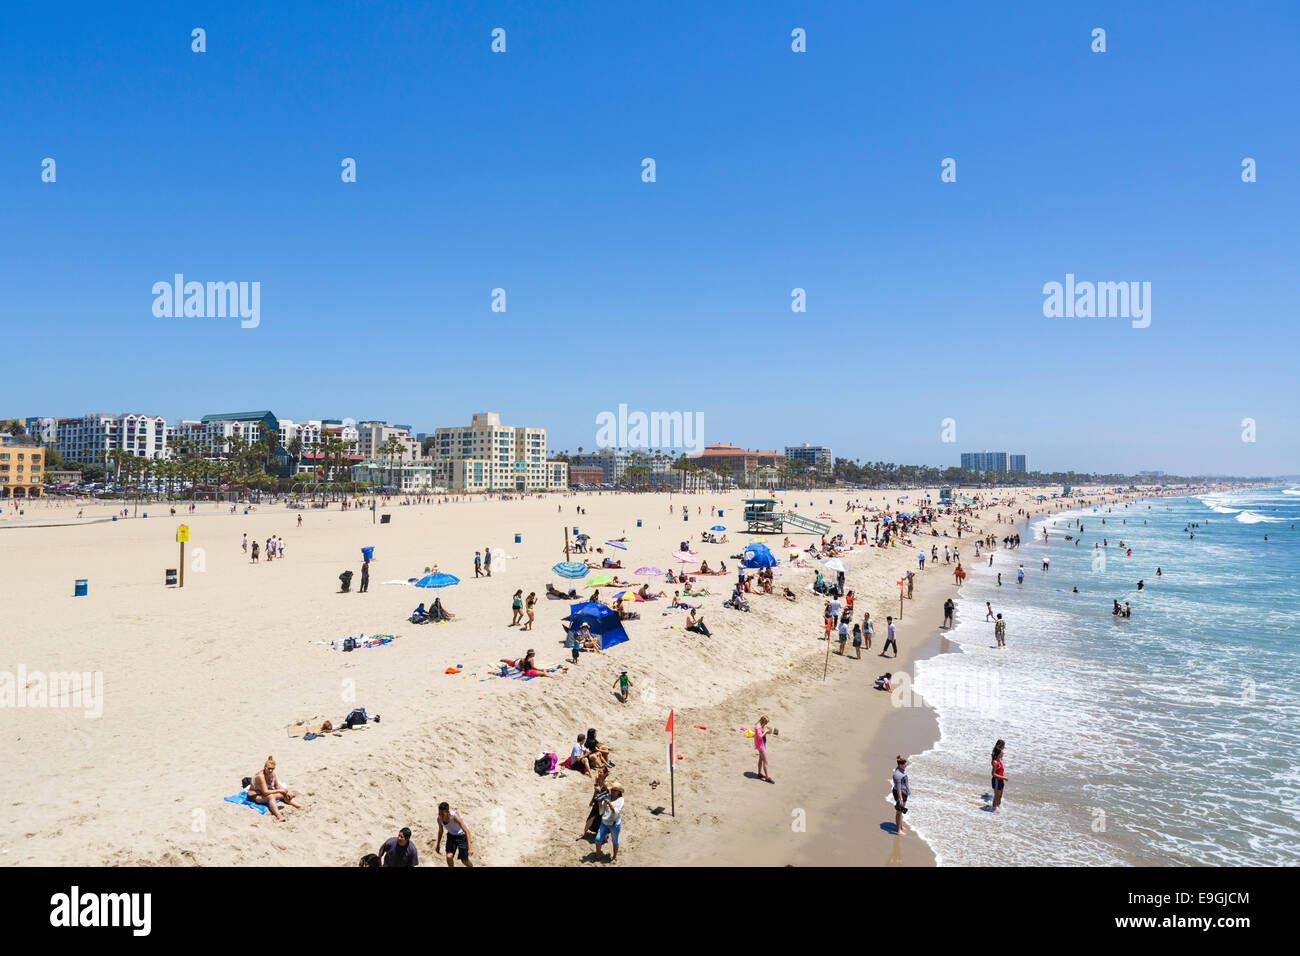 The beach at Santa Monica viewed from the pier, Los Angeles, California, USA Stock Photo